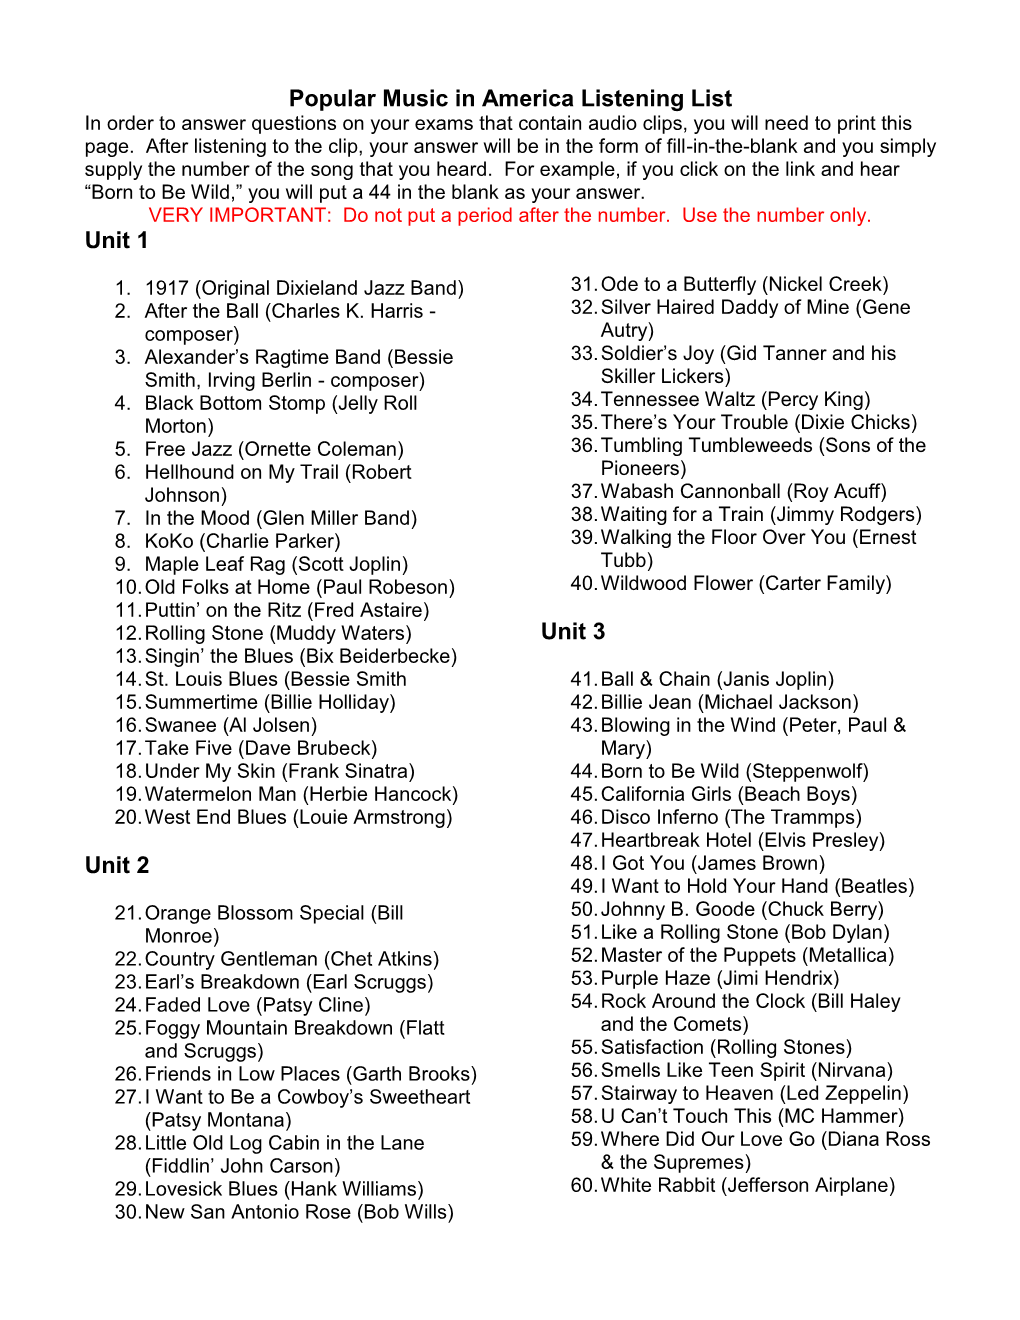 Popular Music in America Listening List in Order to Answer Questions on Your Exams That Contain Audio Clips, You Will Need to Print This Page